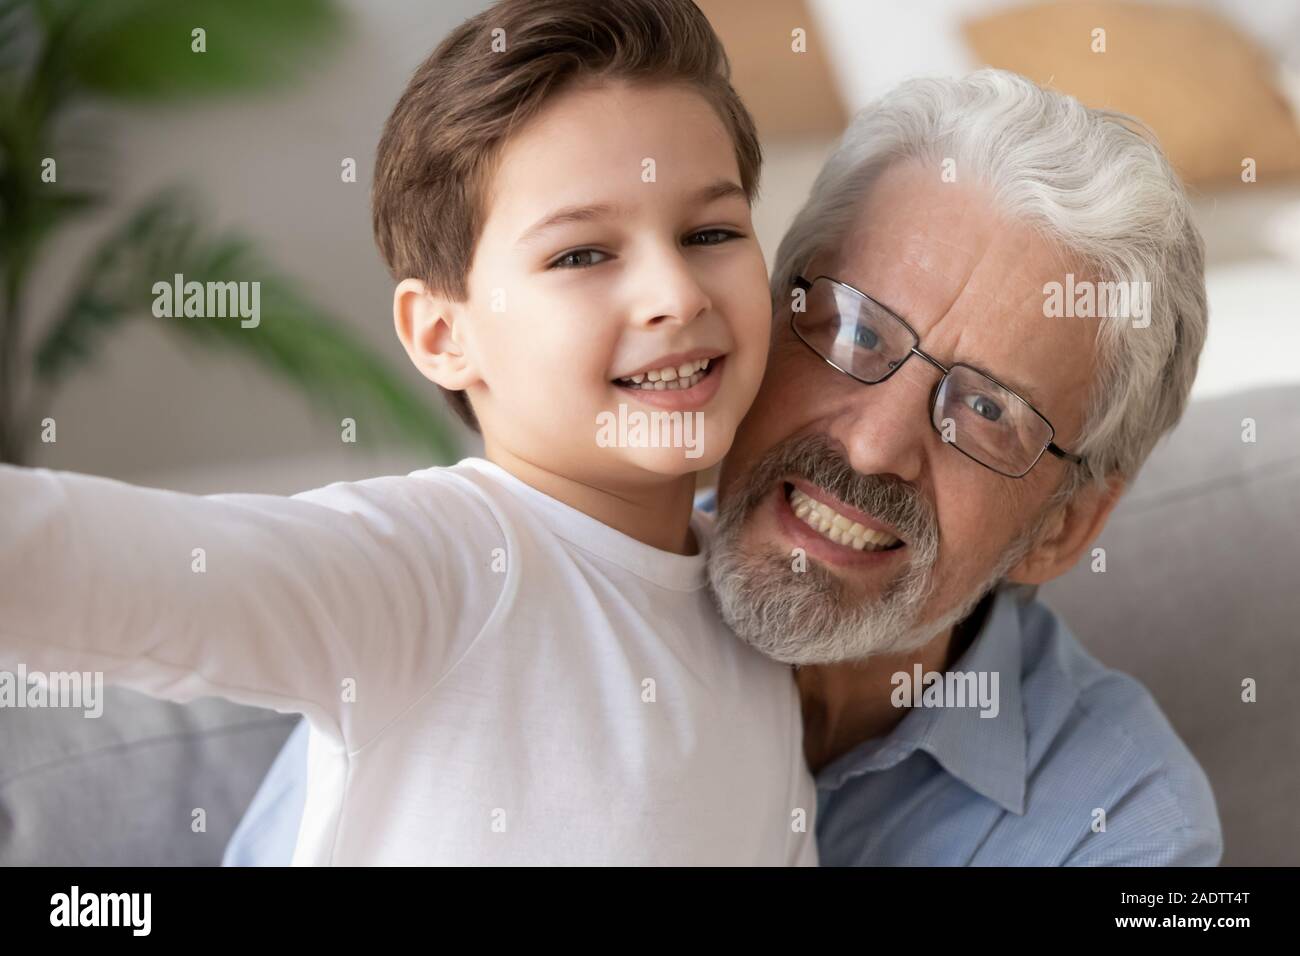 Portrait elderly grandfather and grandson taking selfie together webcam view Stock Photo